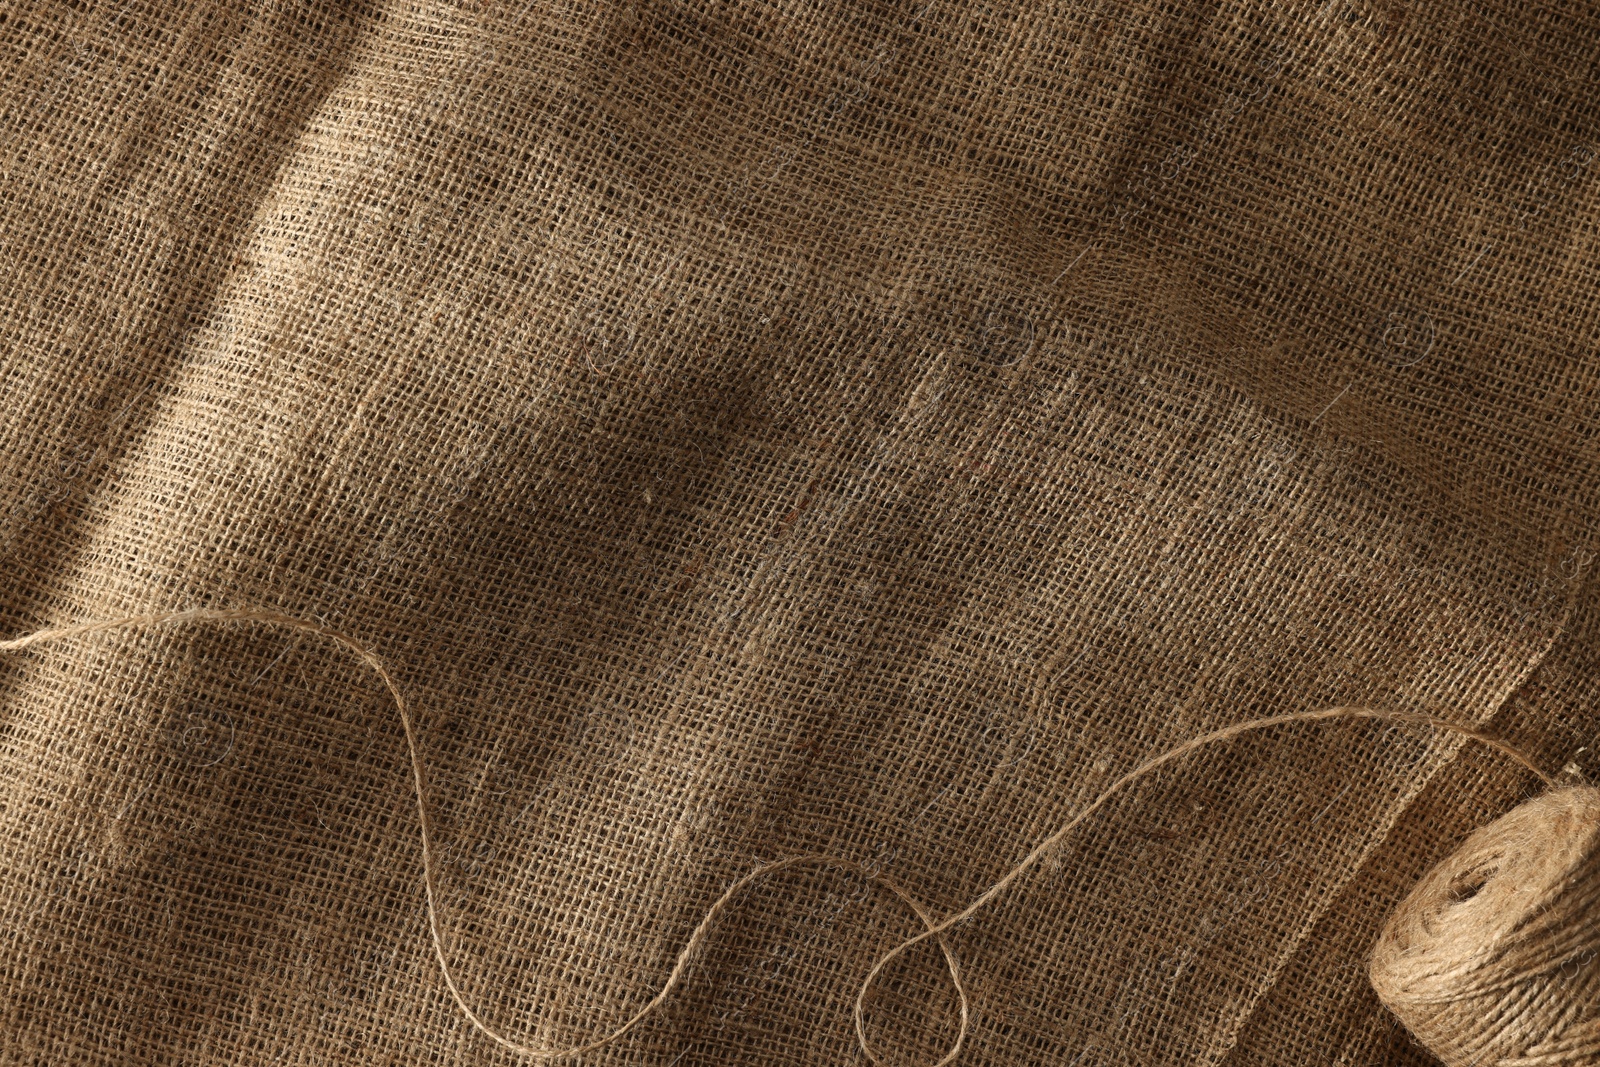 Photo of Spool of thread on burlap fabric, top view